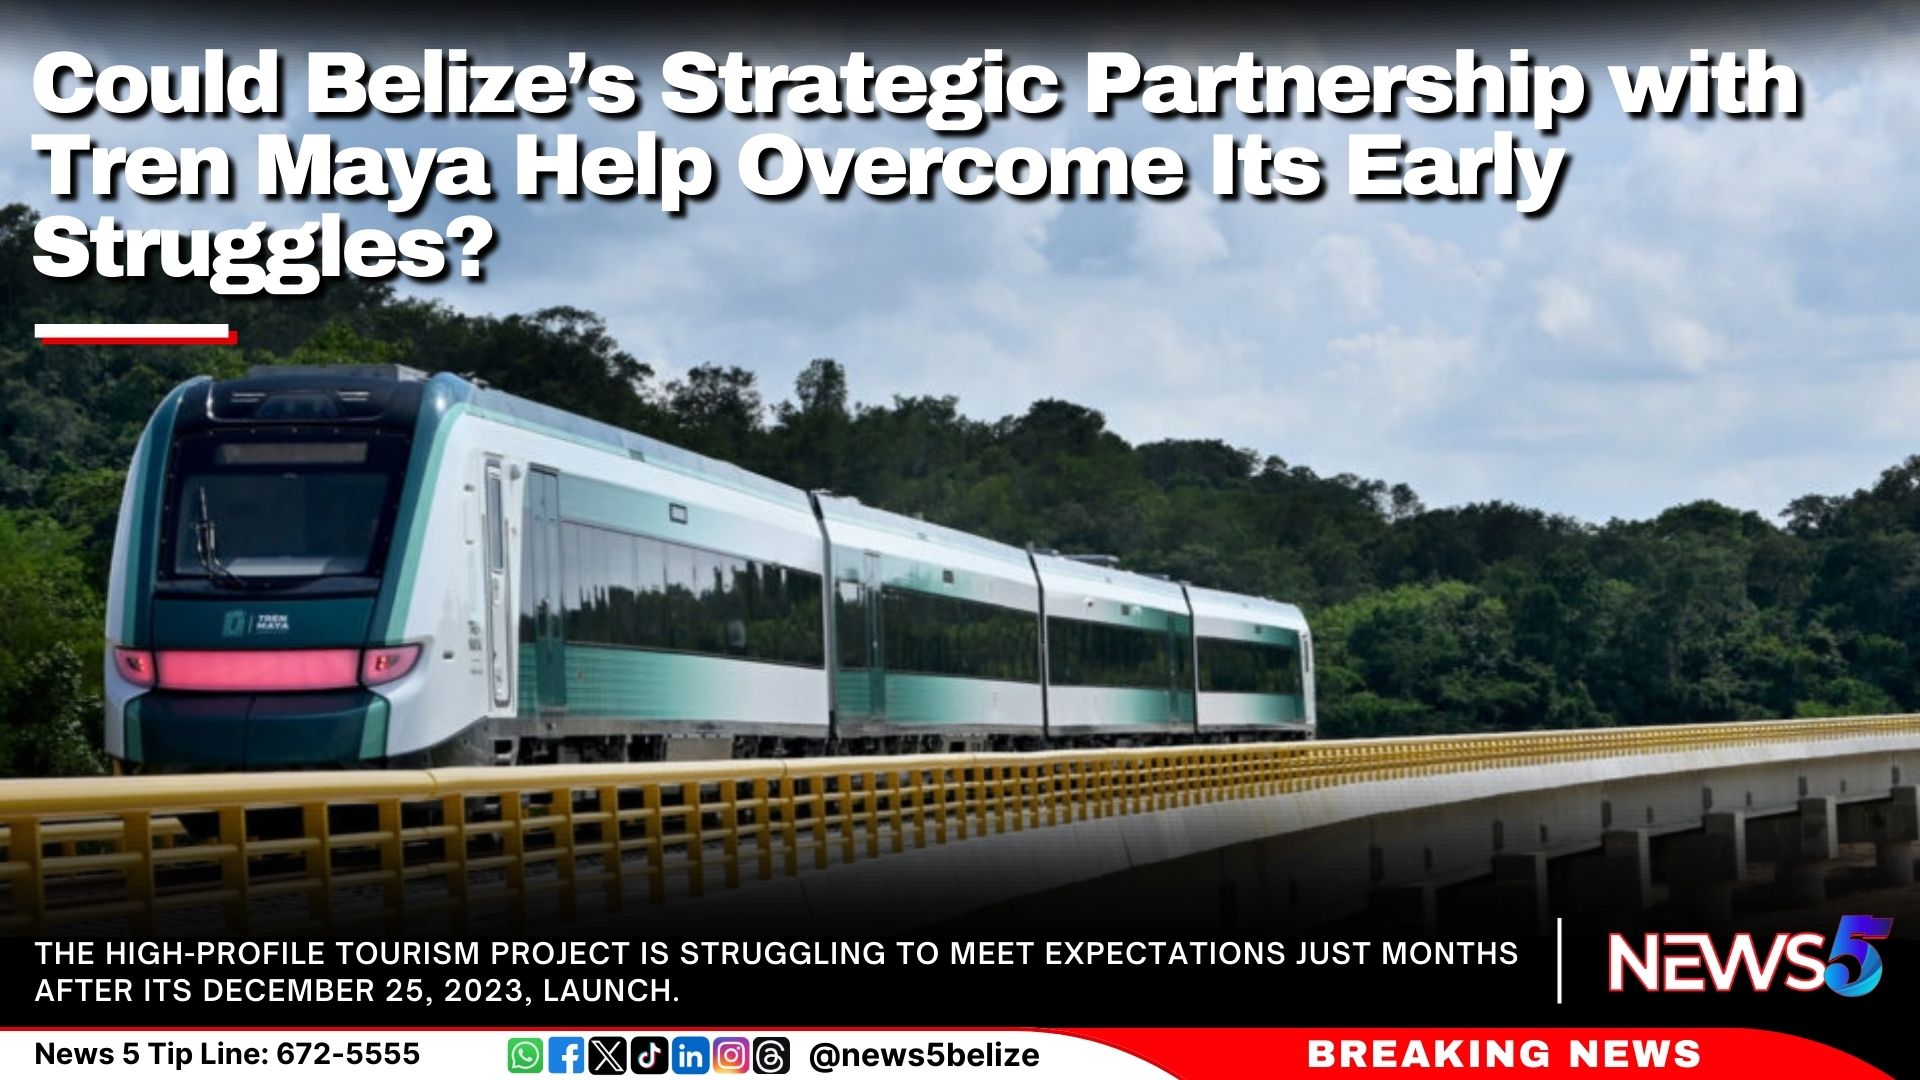 Could Belize’s Strategic Partnership with Tren Maya Help Overcome Its Early Struggles?